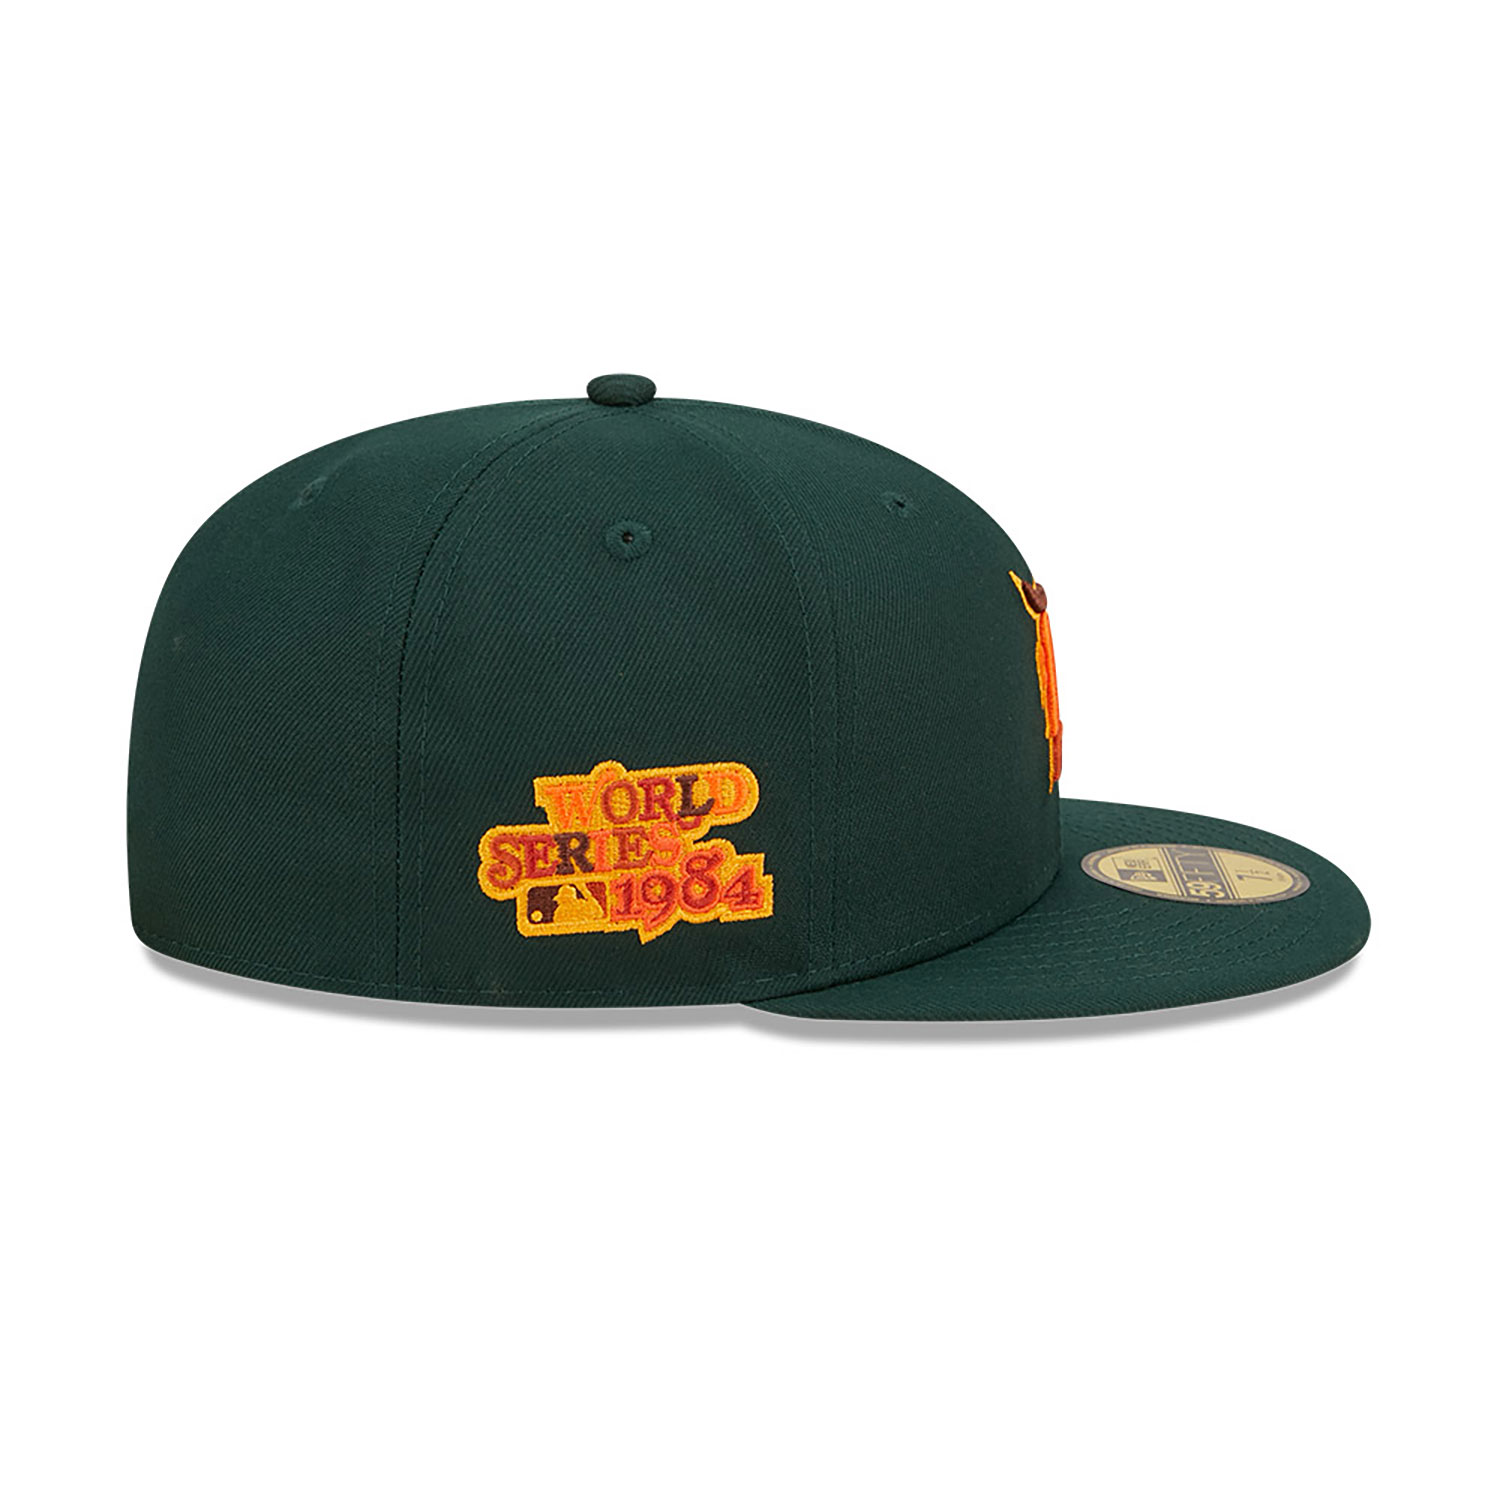 Detroit Tigers Leafy Dark Green 59FIFTY Fitted Cap